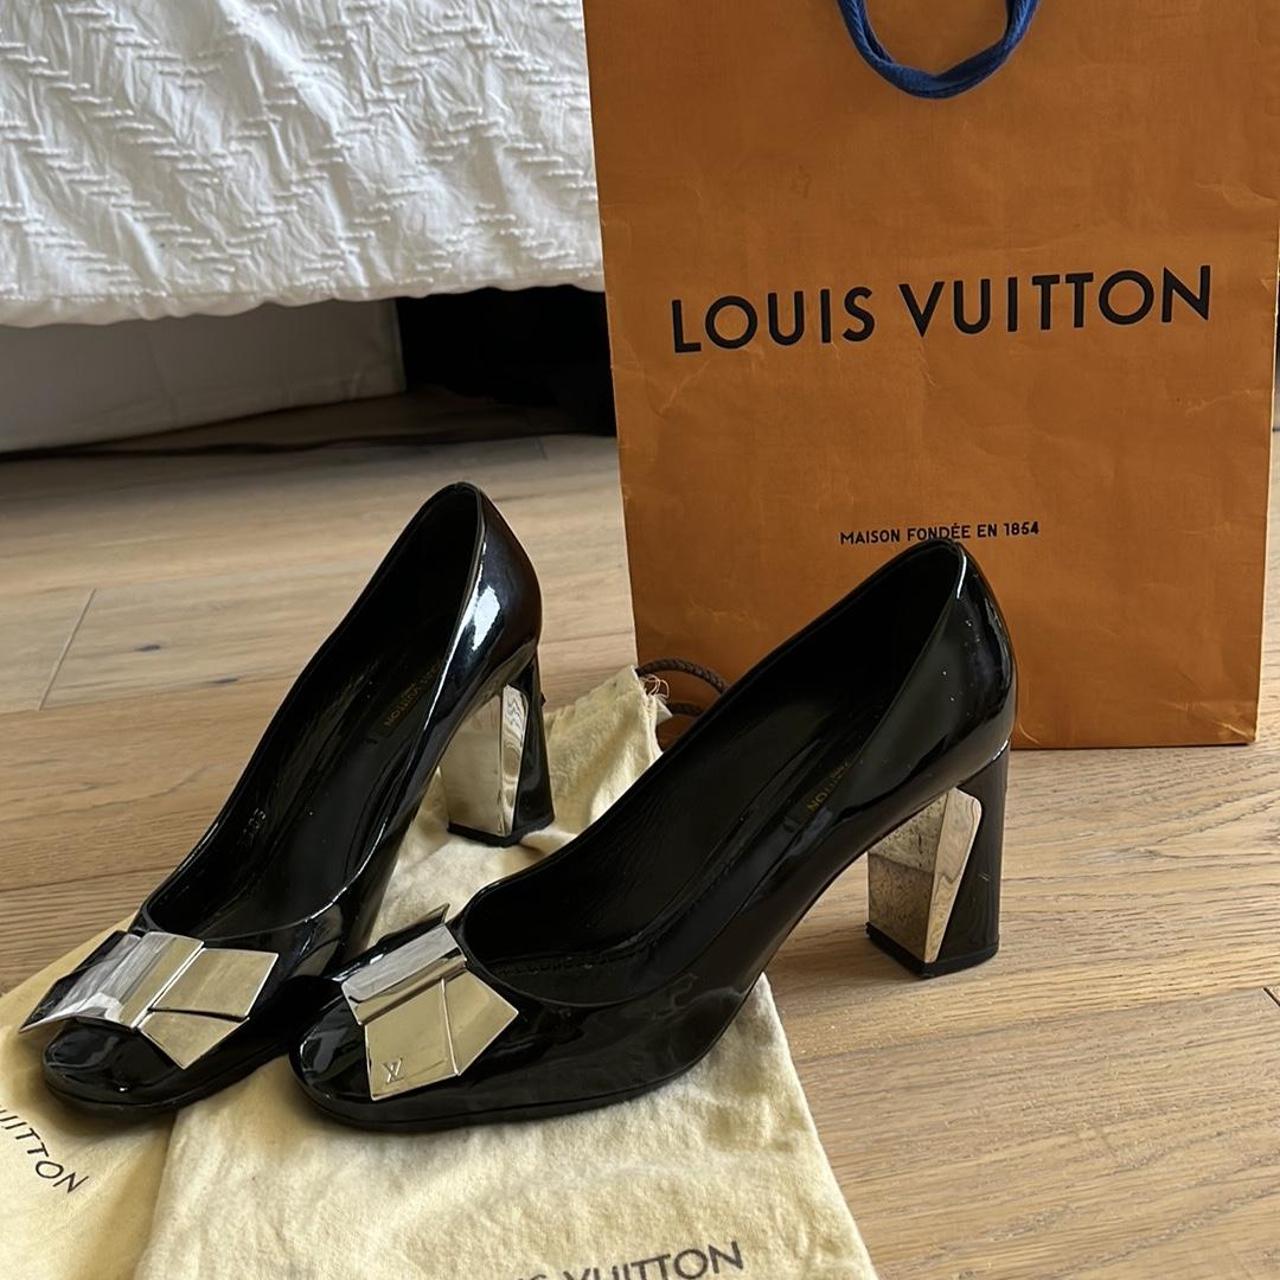 I got these Vintage Louis Vuitton heels with the